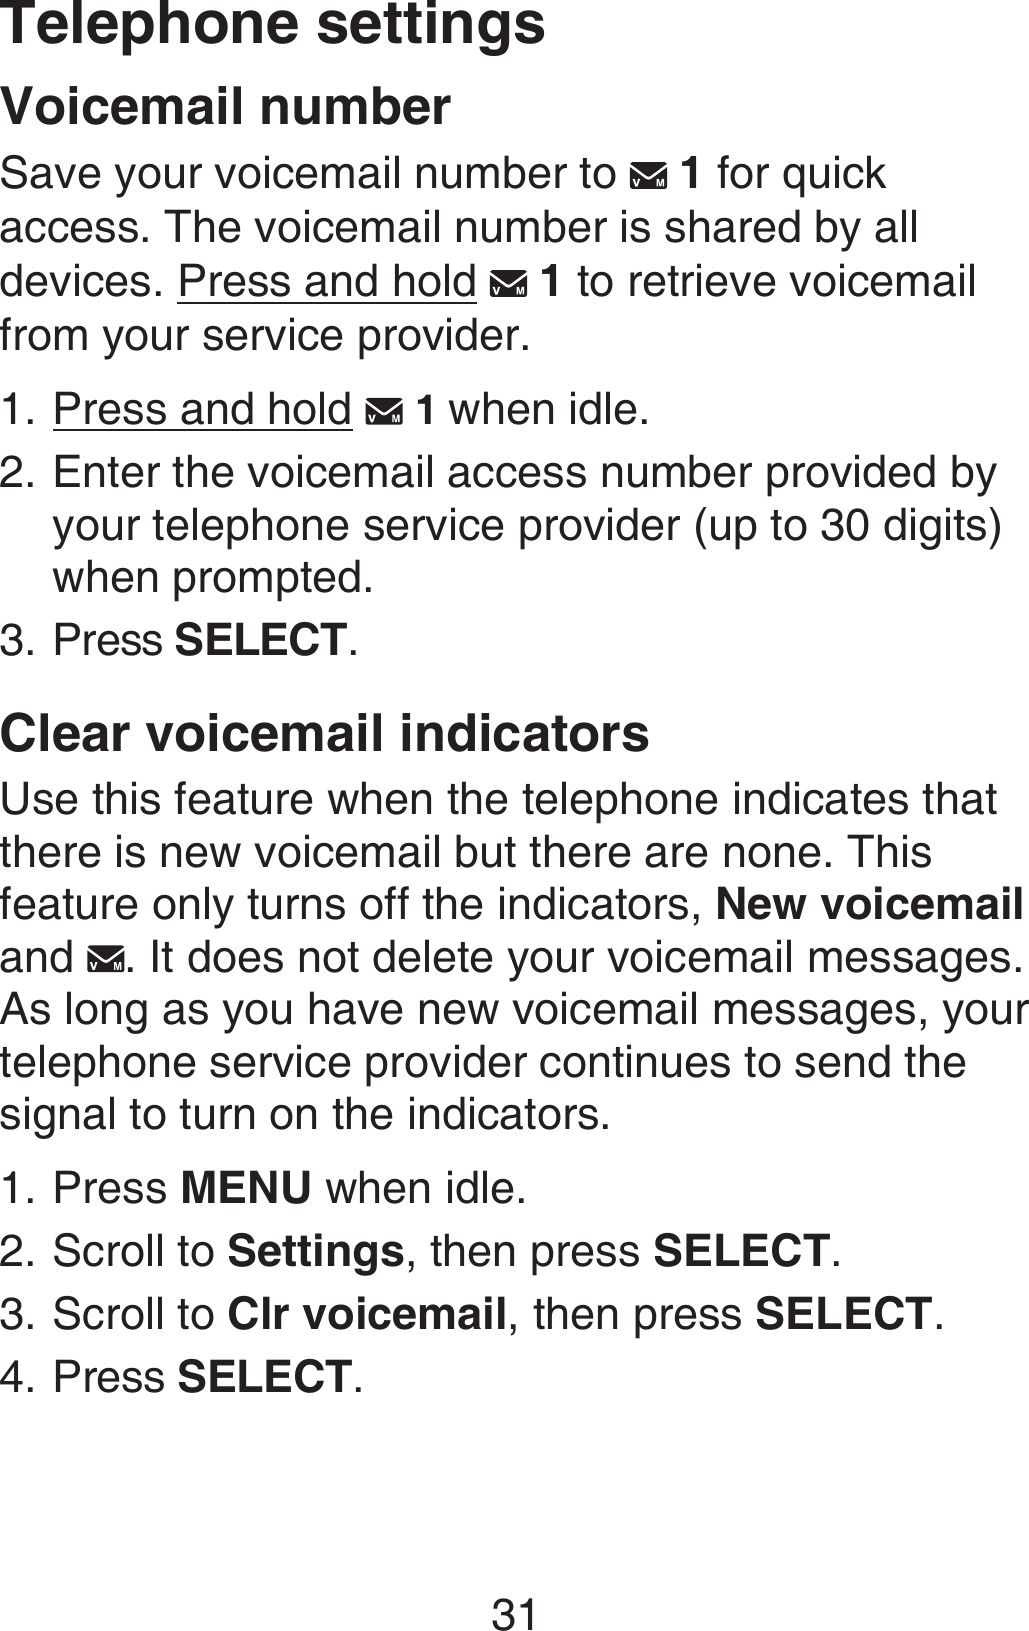 31Telephone settingsVoicemail numberSave your voicemail number to   1 for quick access. The voicemail number is shared by all devices. Press and hold   1 to retrieve voicemail from your service provider.Press and hold   1 when idle.Enter the voicemail access number provided by your telephone service provider (up to 30 digits) when prompted. Press SELECT.Clear voicemail indicatorsUse this feature when the telephone indicates that there is new voicemail but there are none. This feature only turns off the indicators, New voicemail and  . It does not delete your voicemail messages. As long as you have new voicemail messages, your telephone service provider continues to send the signal to turn on the indicators.Press MENU when idle.Scroll to Settings, then press SELECT.Scroll to Clr voicemail, then press SELECT.Press SELECT.1.2.3.1.2.3.4.